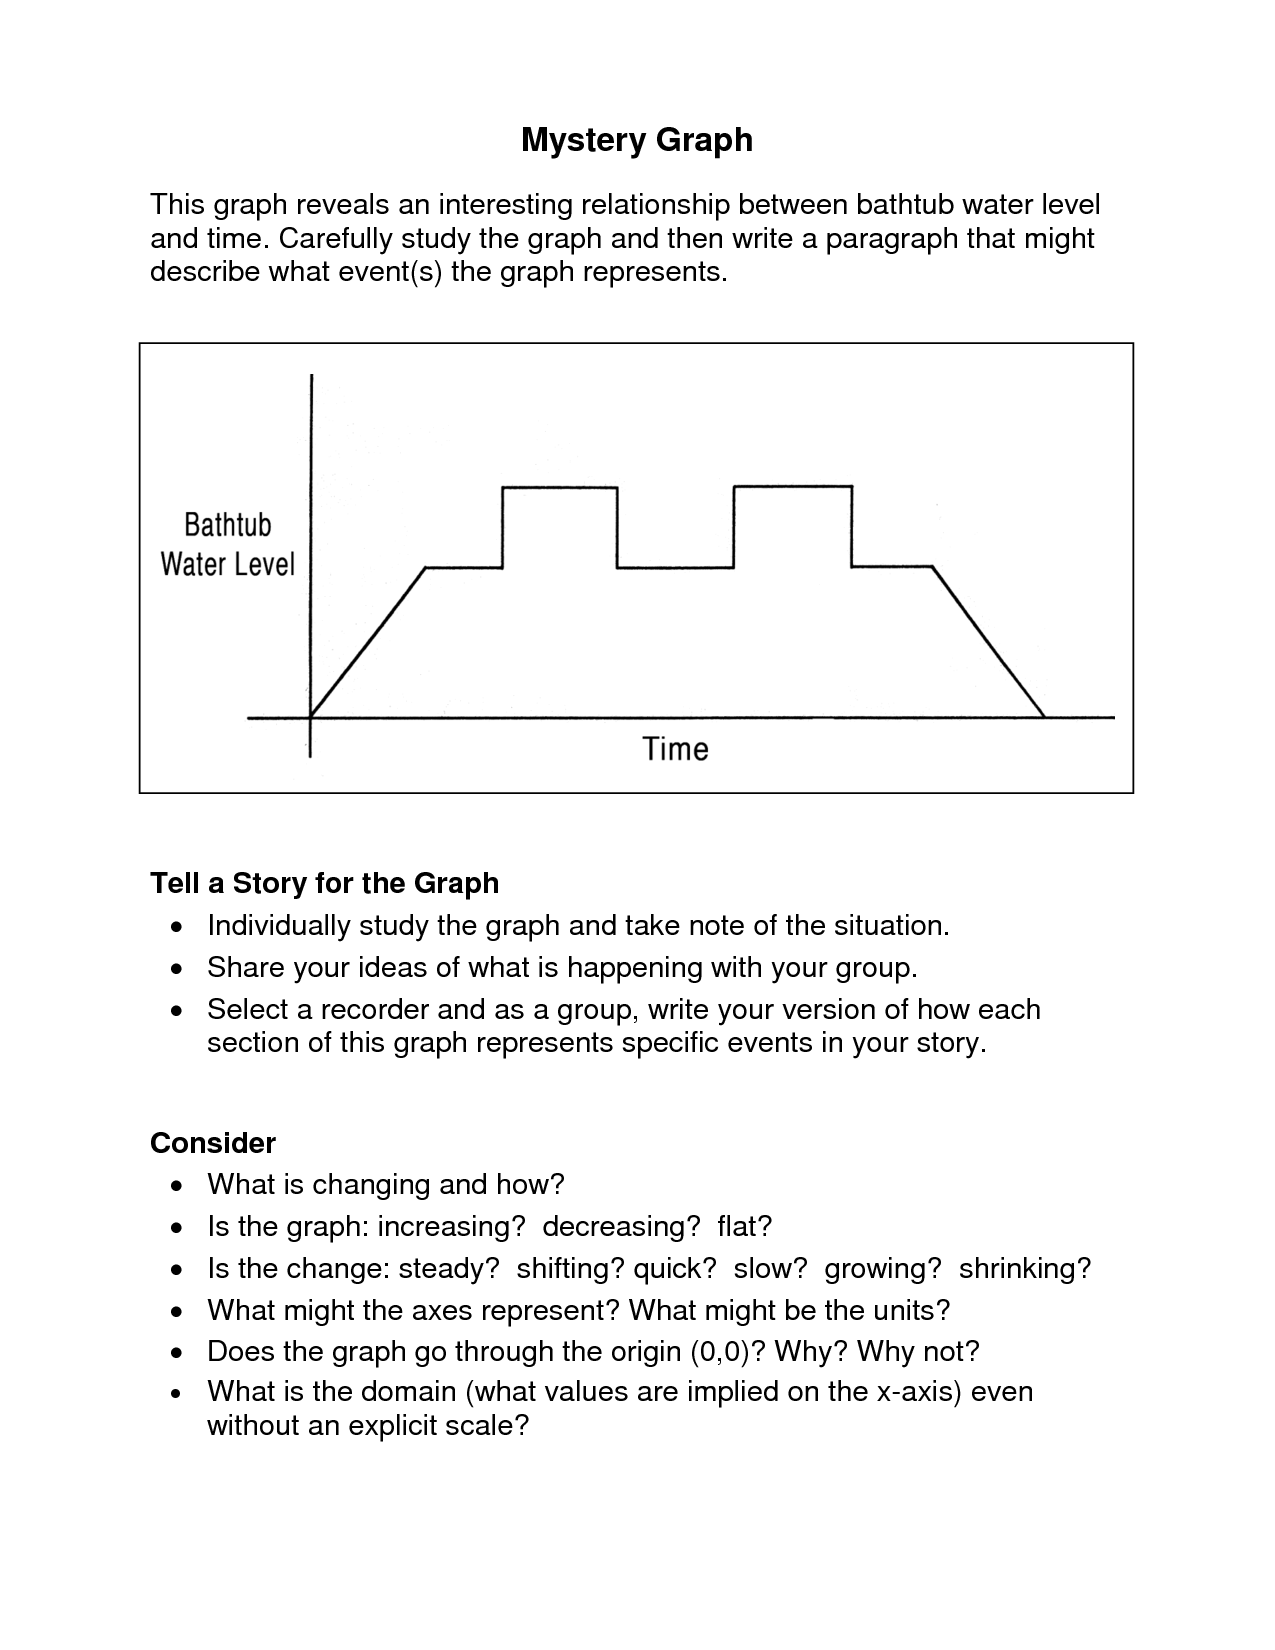 11-best-images-of-holiday-graph-art-worksheets-creating-bar-graphs-worksheets-mystery-grid